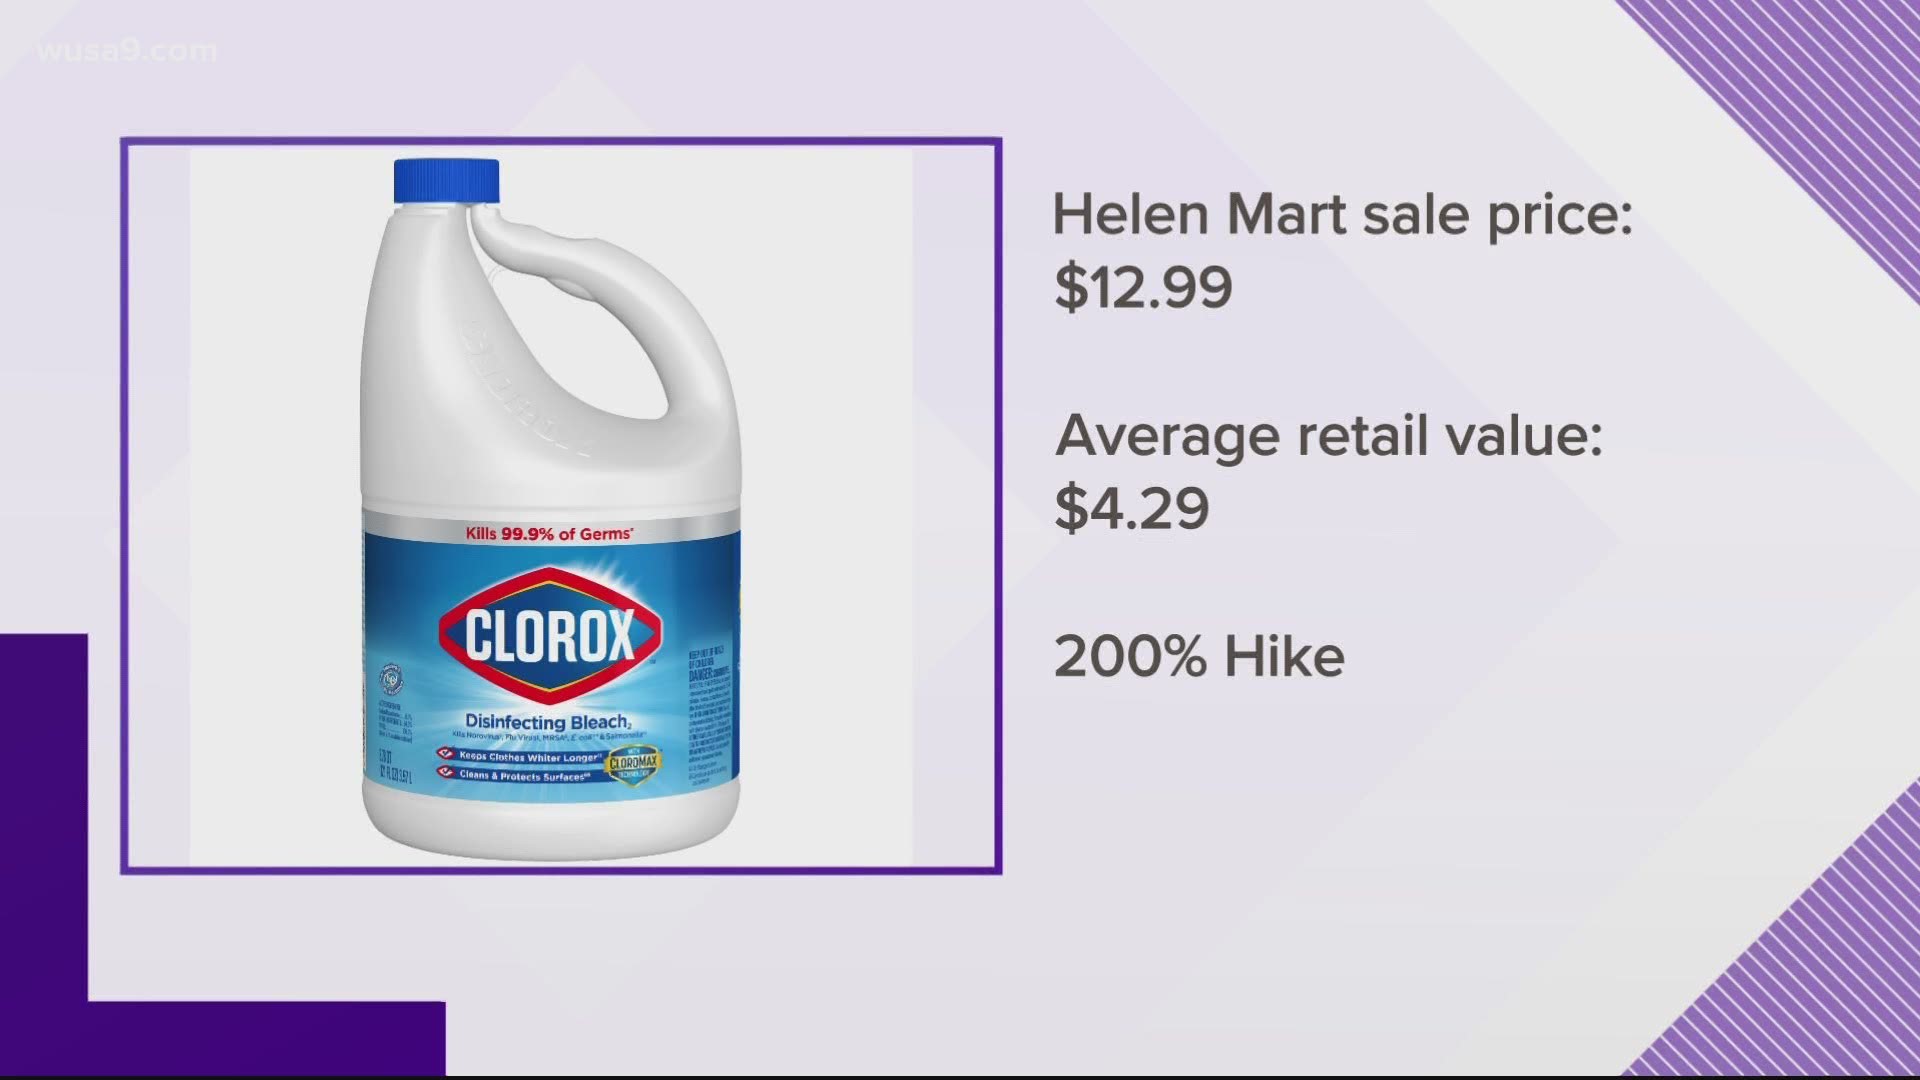 Helen Mart is in the Deanwood section of Ward 7. In fact, according to the AG most of these price gouging cases are targeting communities East of the River.